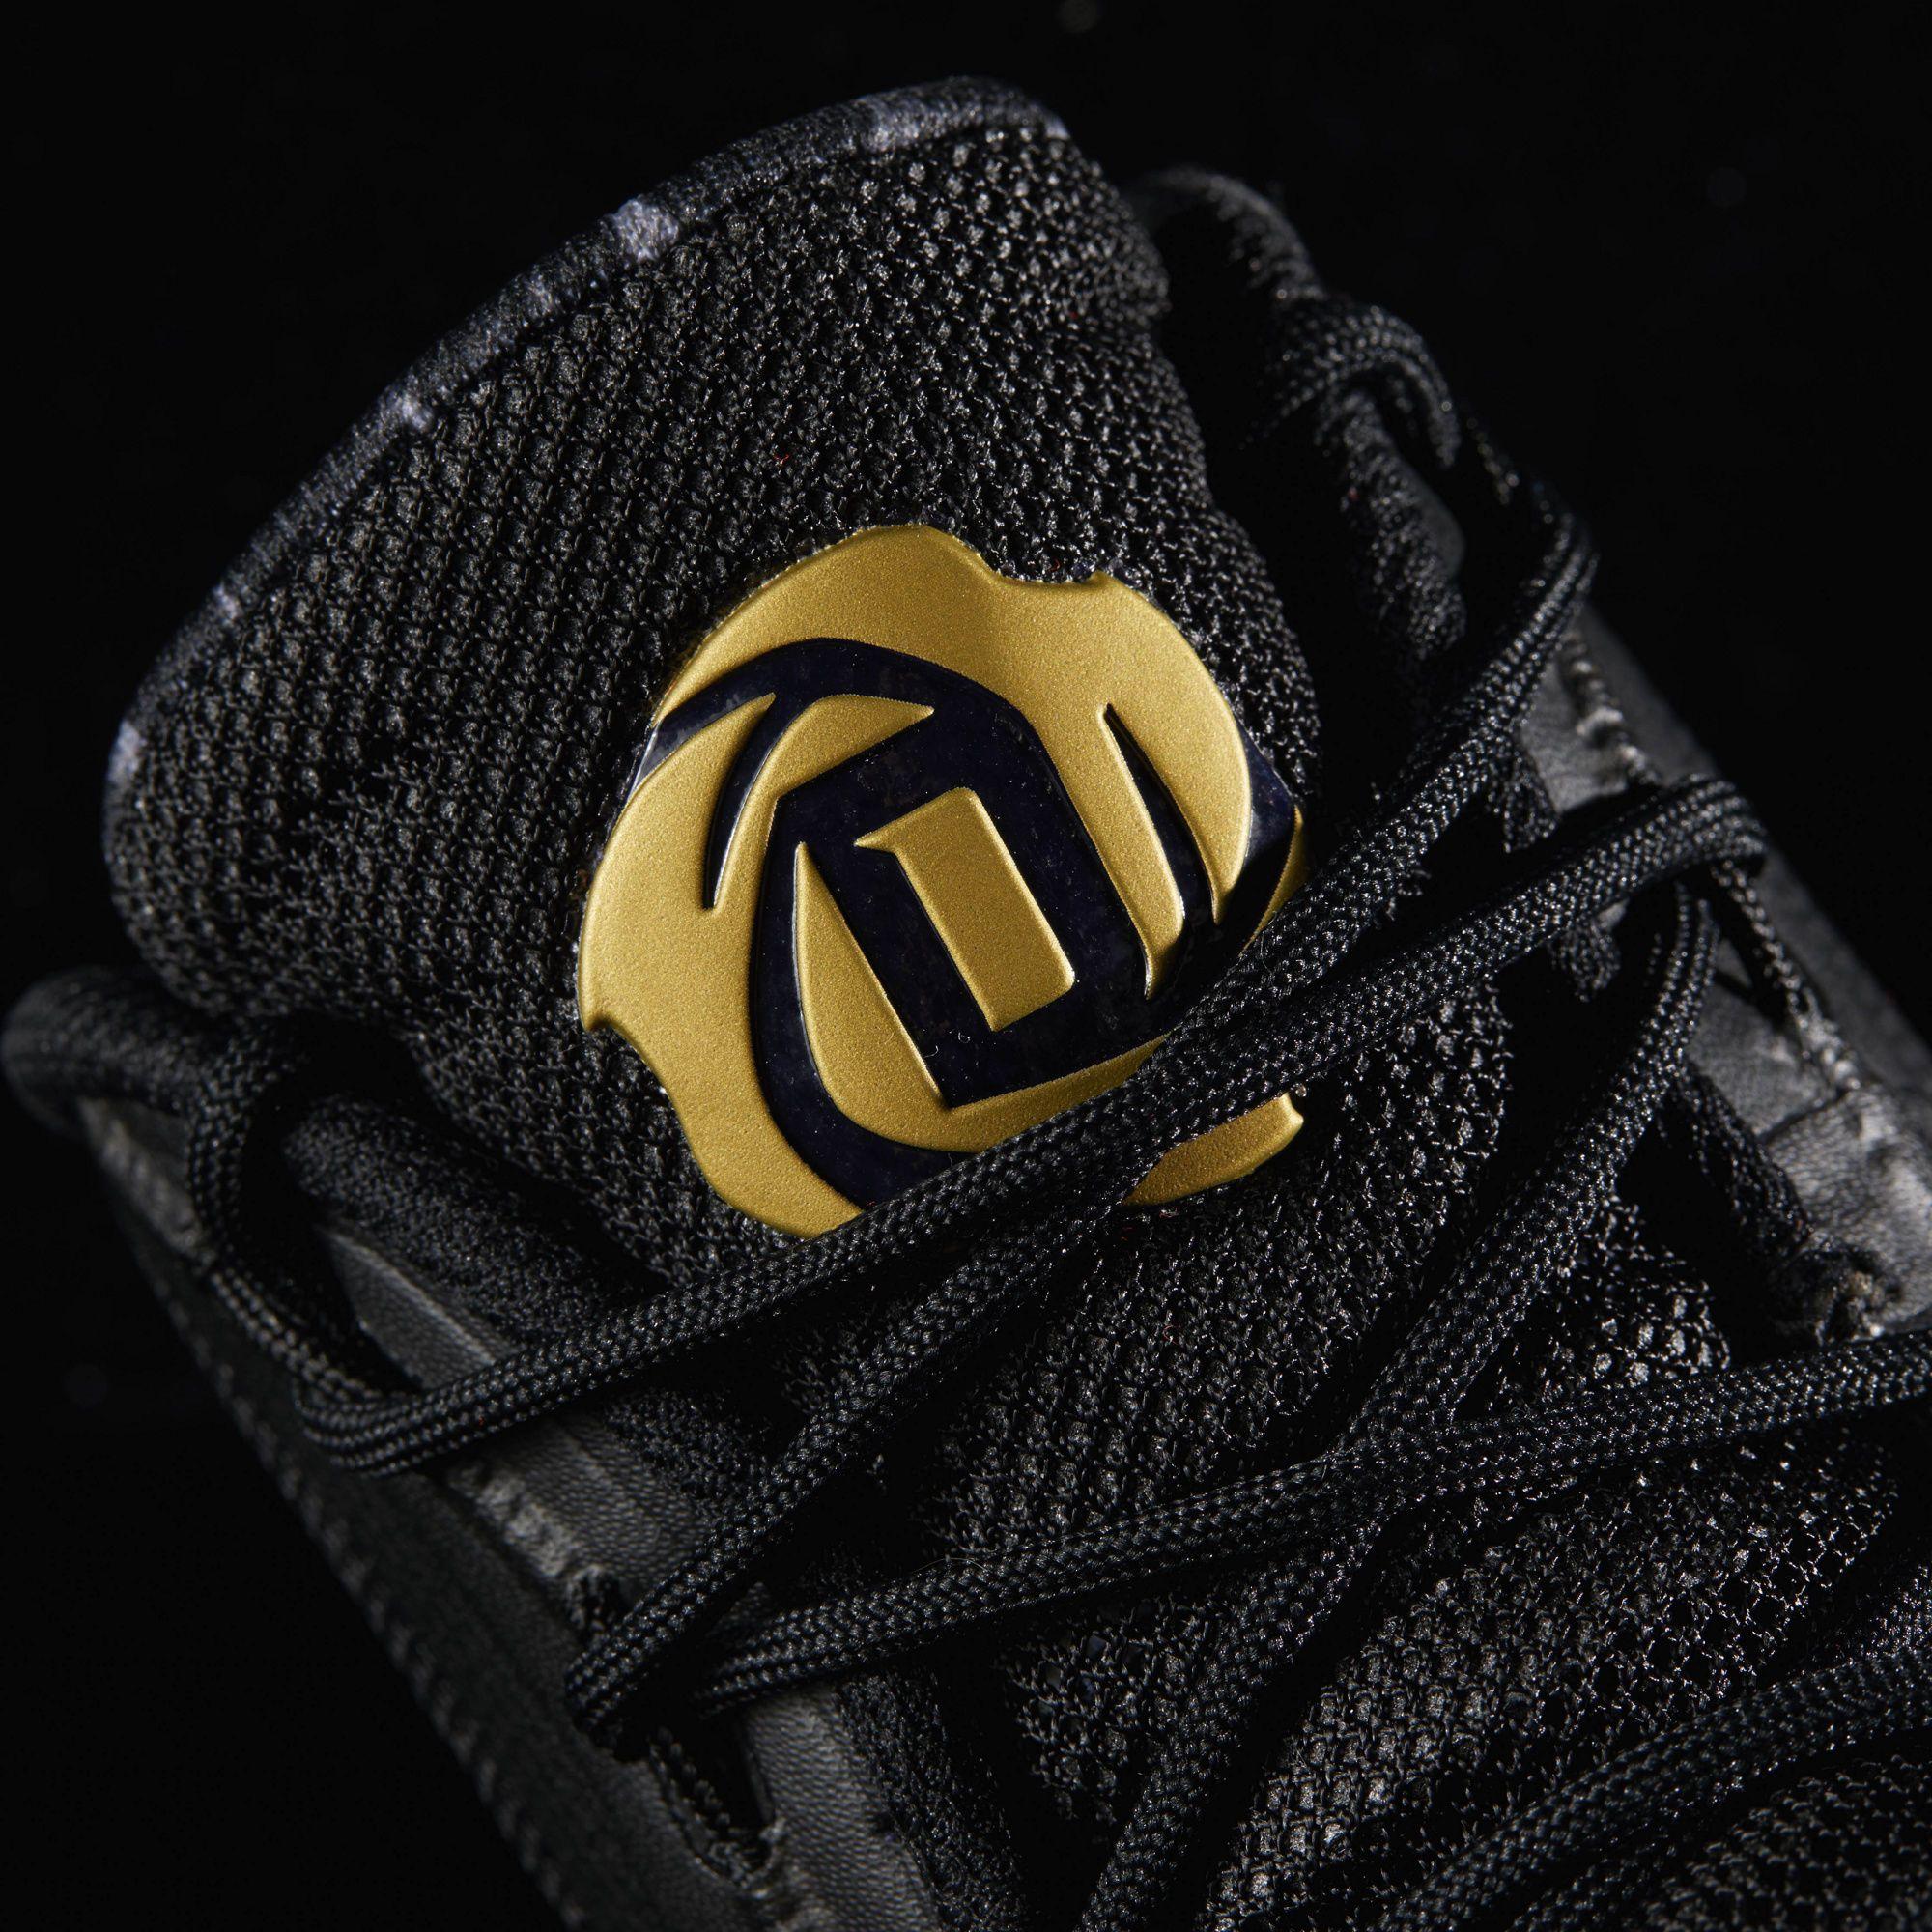 Black and Gold D Logo - Best Sale Discounted Adidas Core Black/Gold Metallic/Footwear White ...